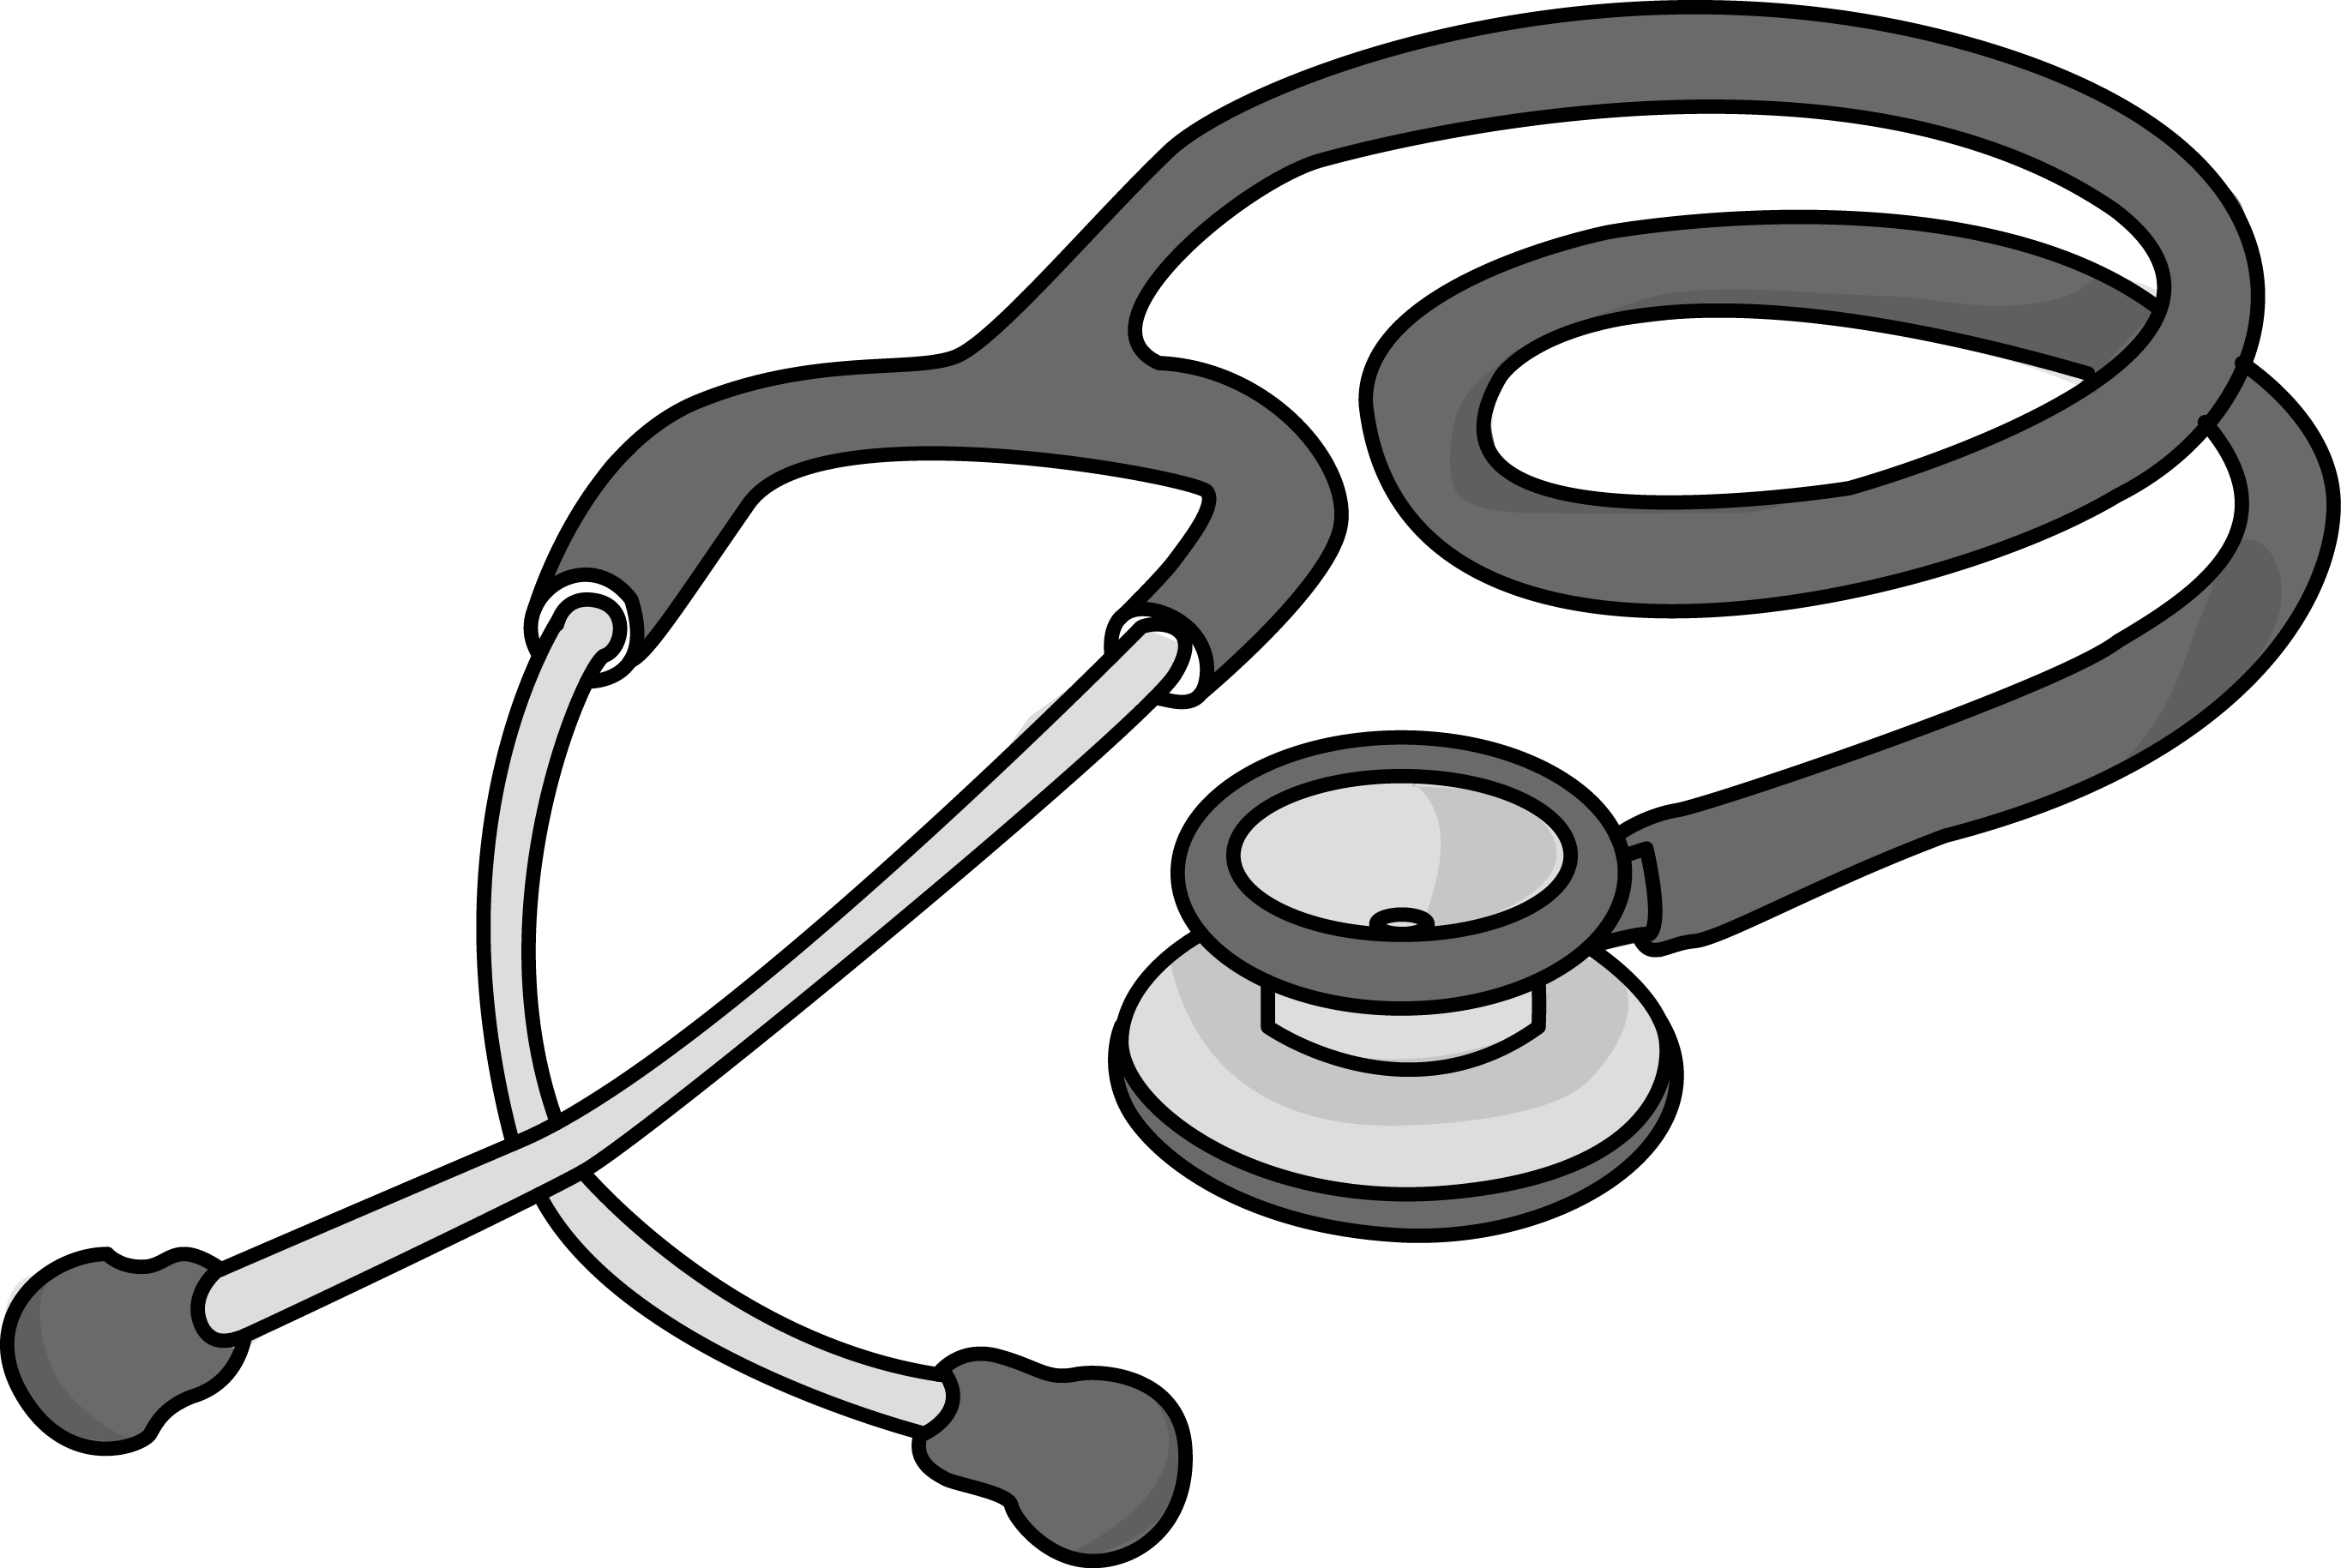  collection of black. Nursing clipart heartbeat stethoscope